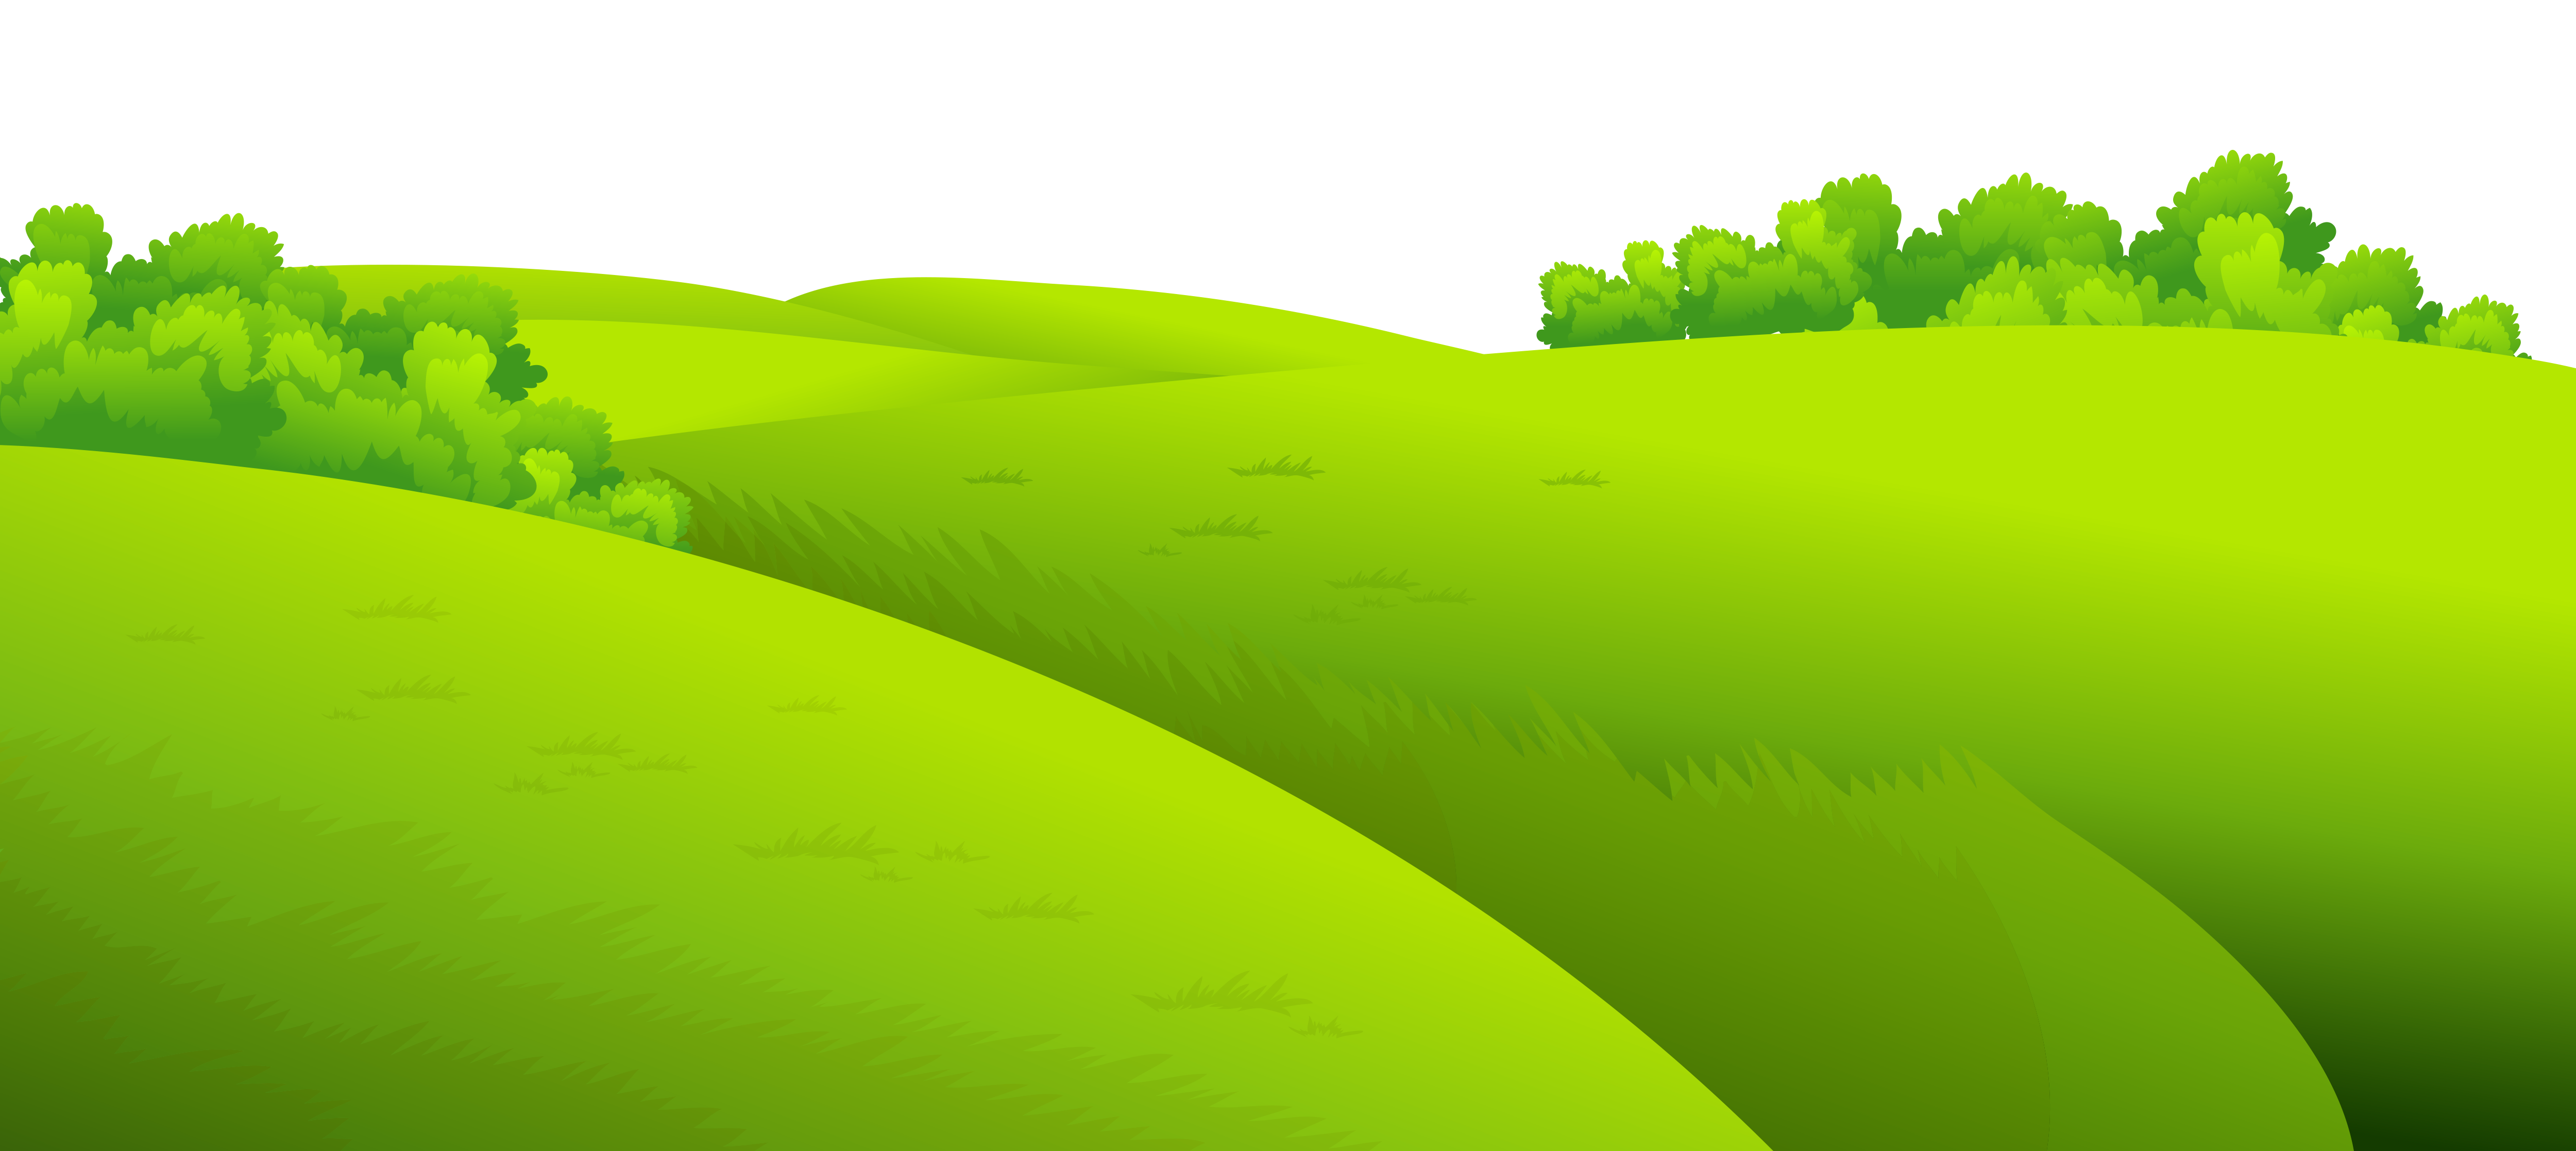 Grass ground png clip. Hill clipart green nature